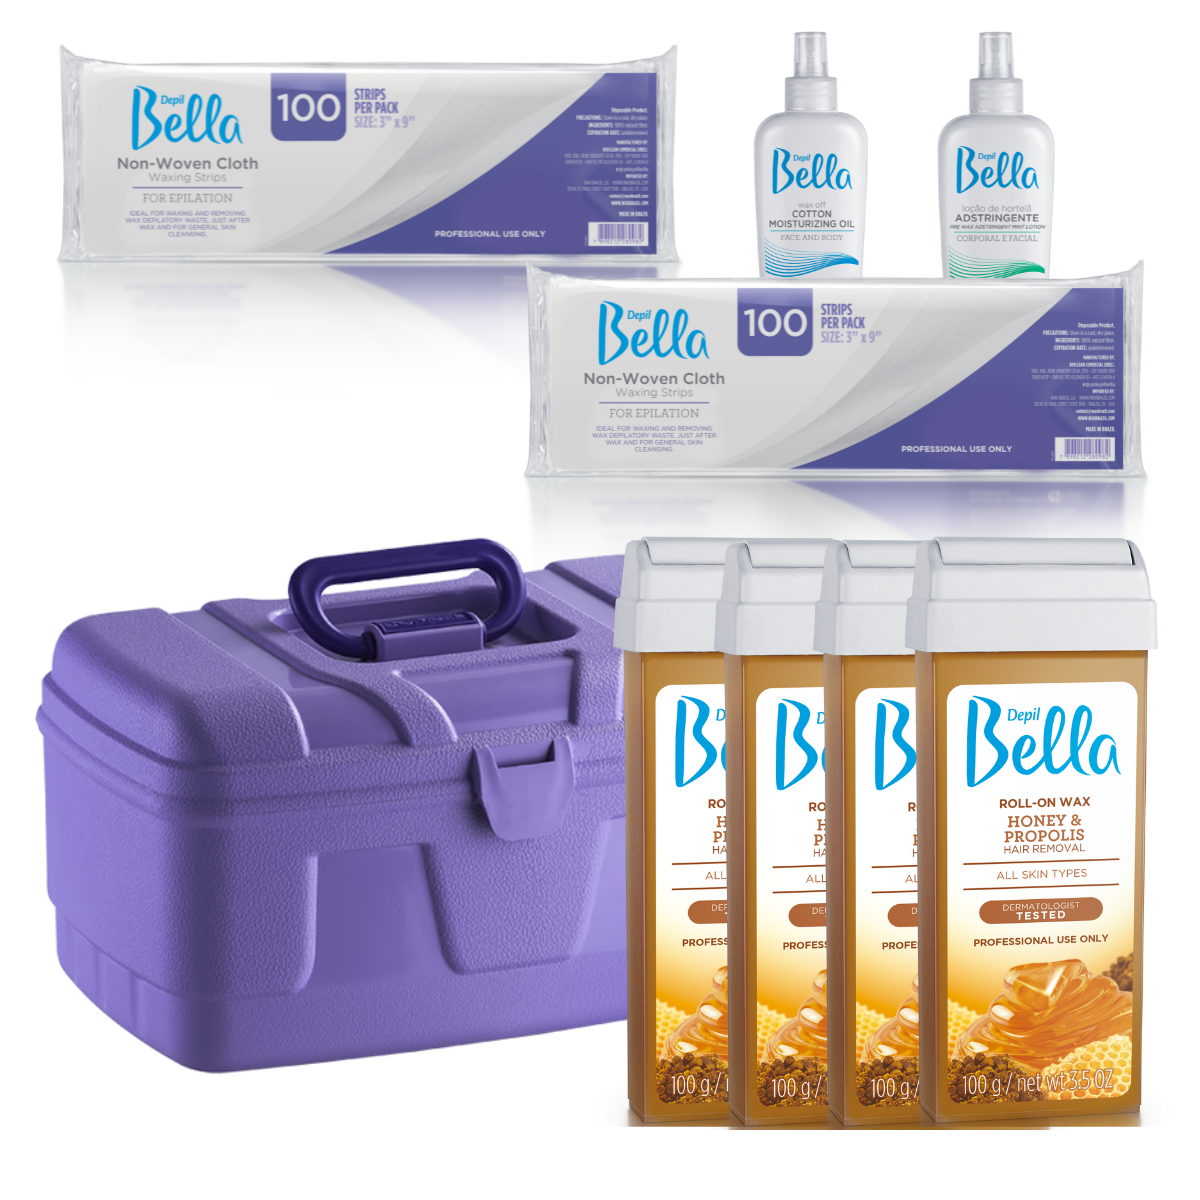 Depil Bella Bundle - 200 Non-Woven Cloths, 4 Roll-On Honey Wax, Pre-Wax Astringent Lotion, Wax-Off Moisturizing Oil, and Purple Plastic Case